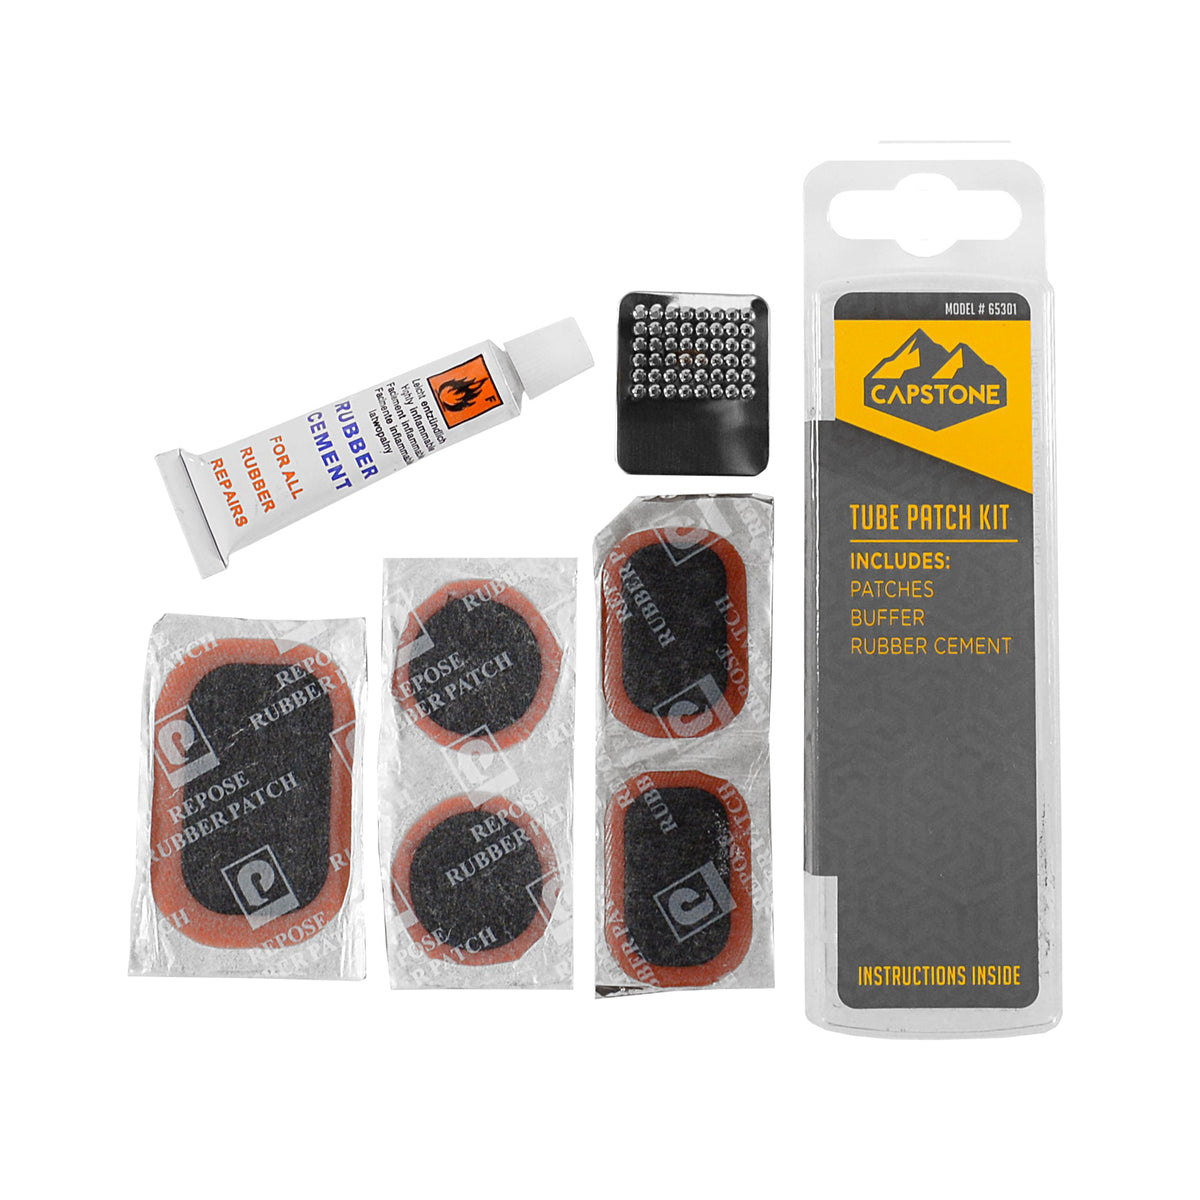 Capstone Tube Patch Kit | Includes 5 Patches, Rubber Cement, & Buffer